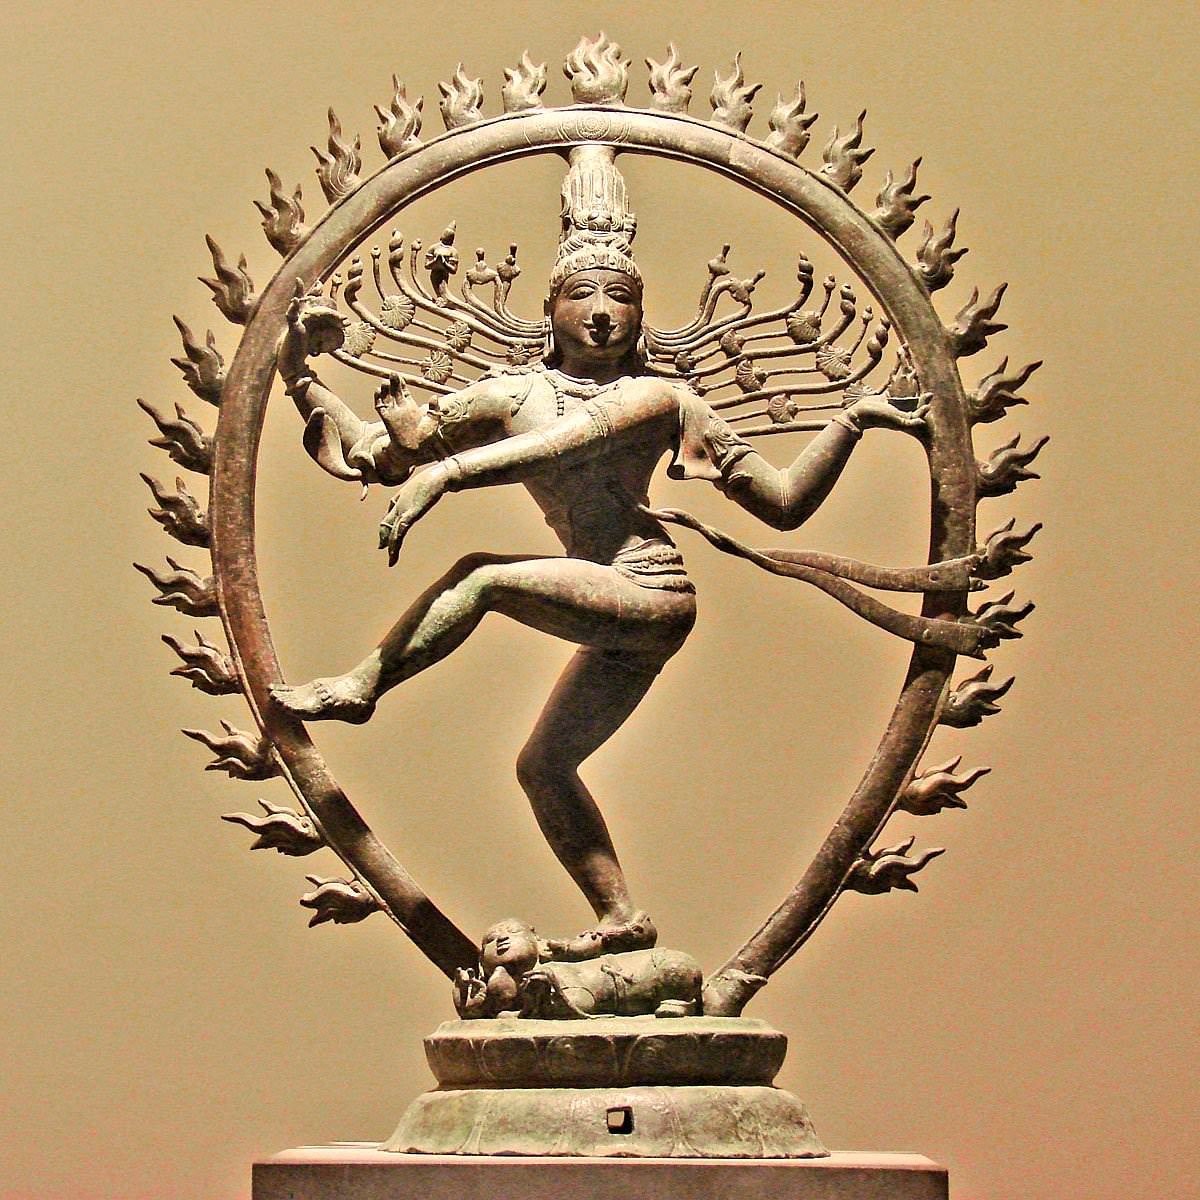 An Interesting Fact About Nataraja Idol, by Cottage9